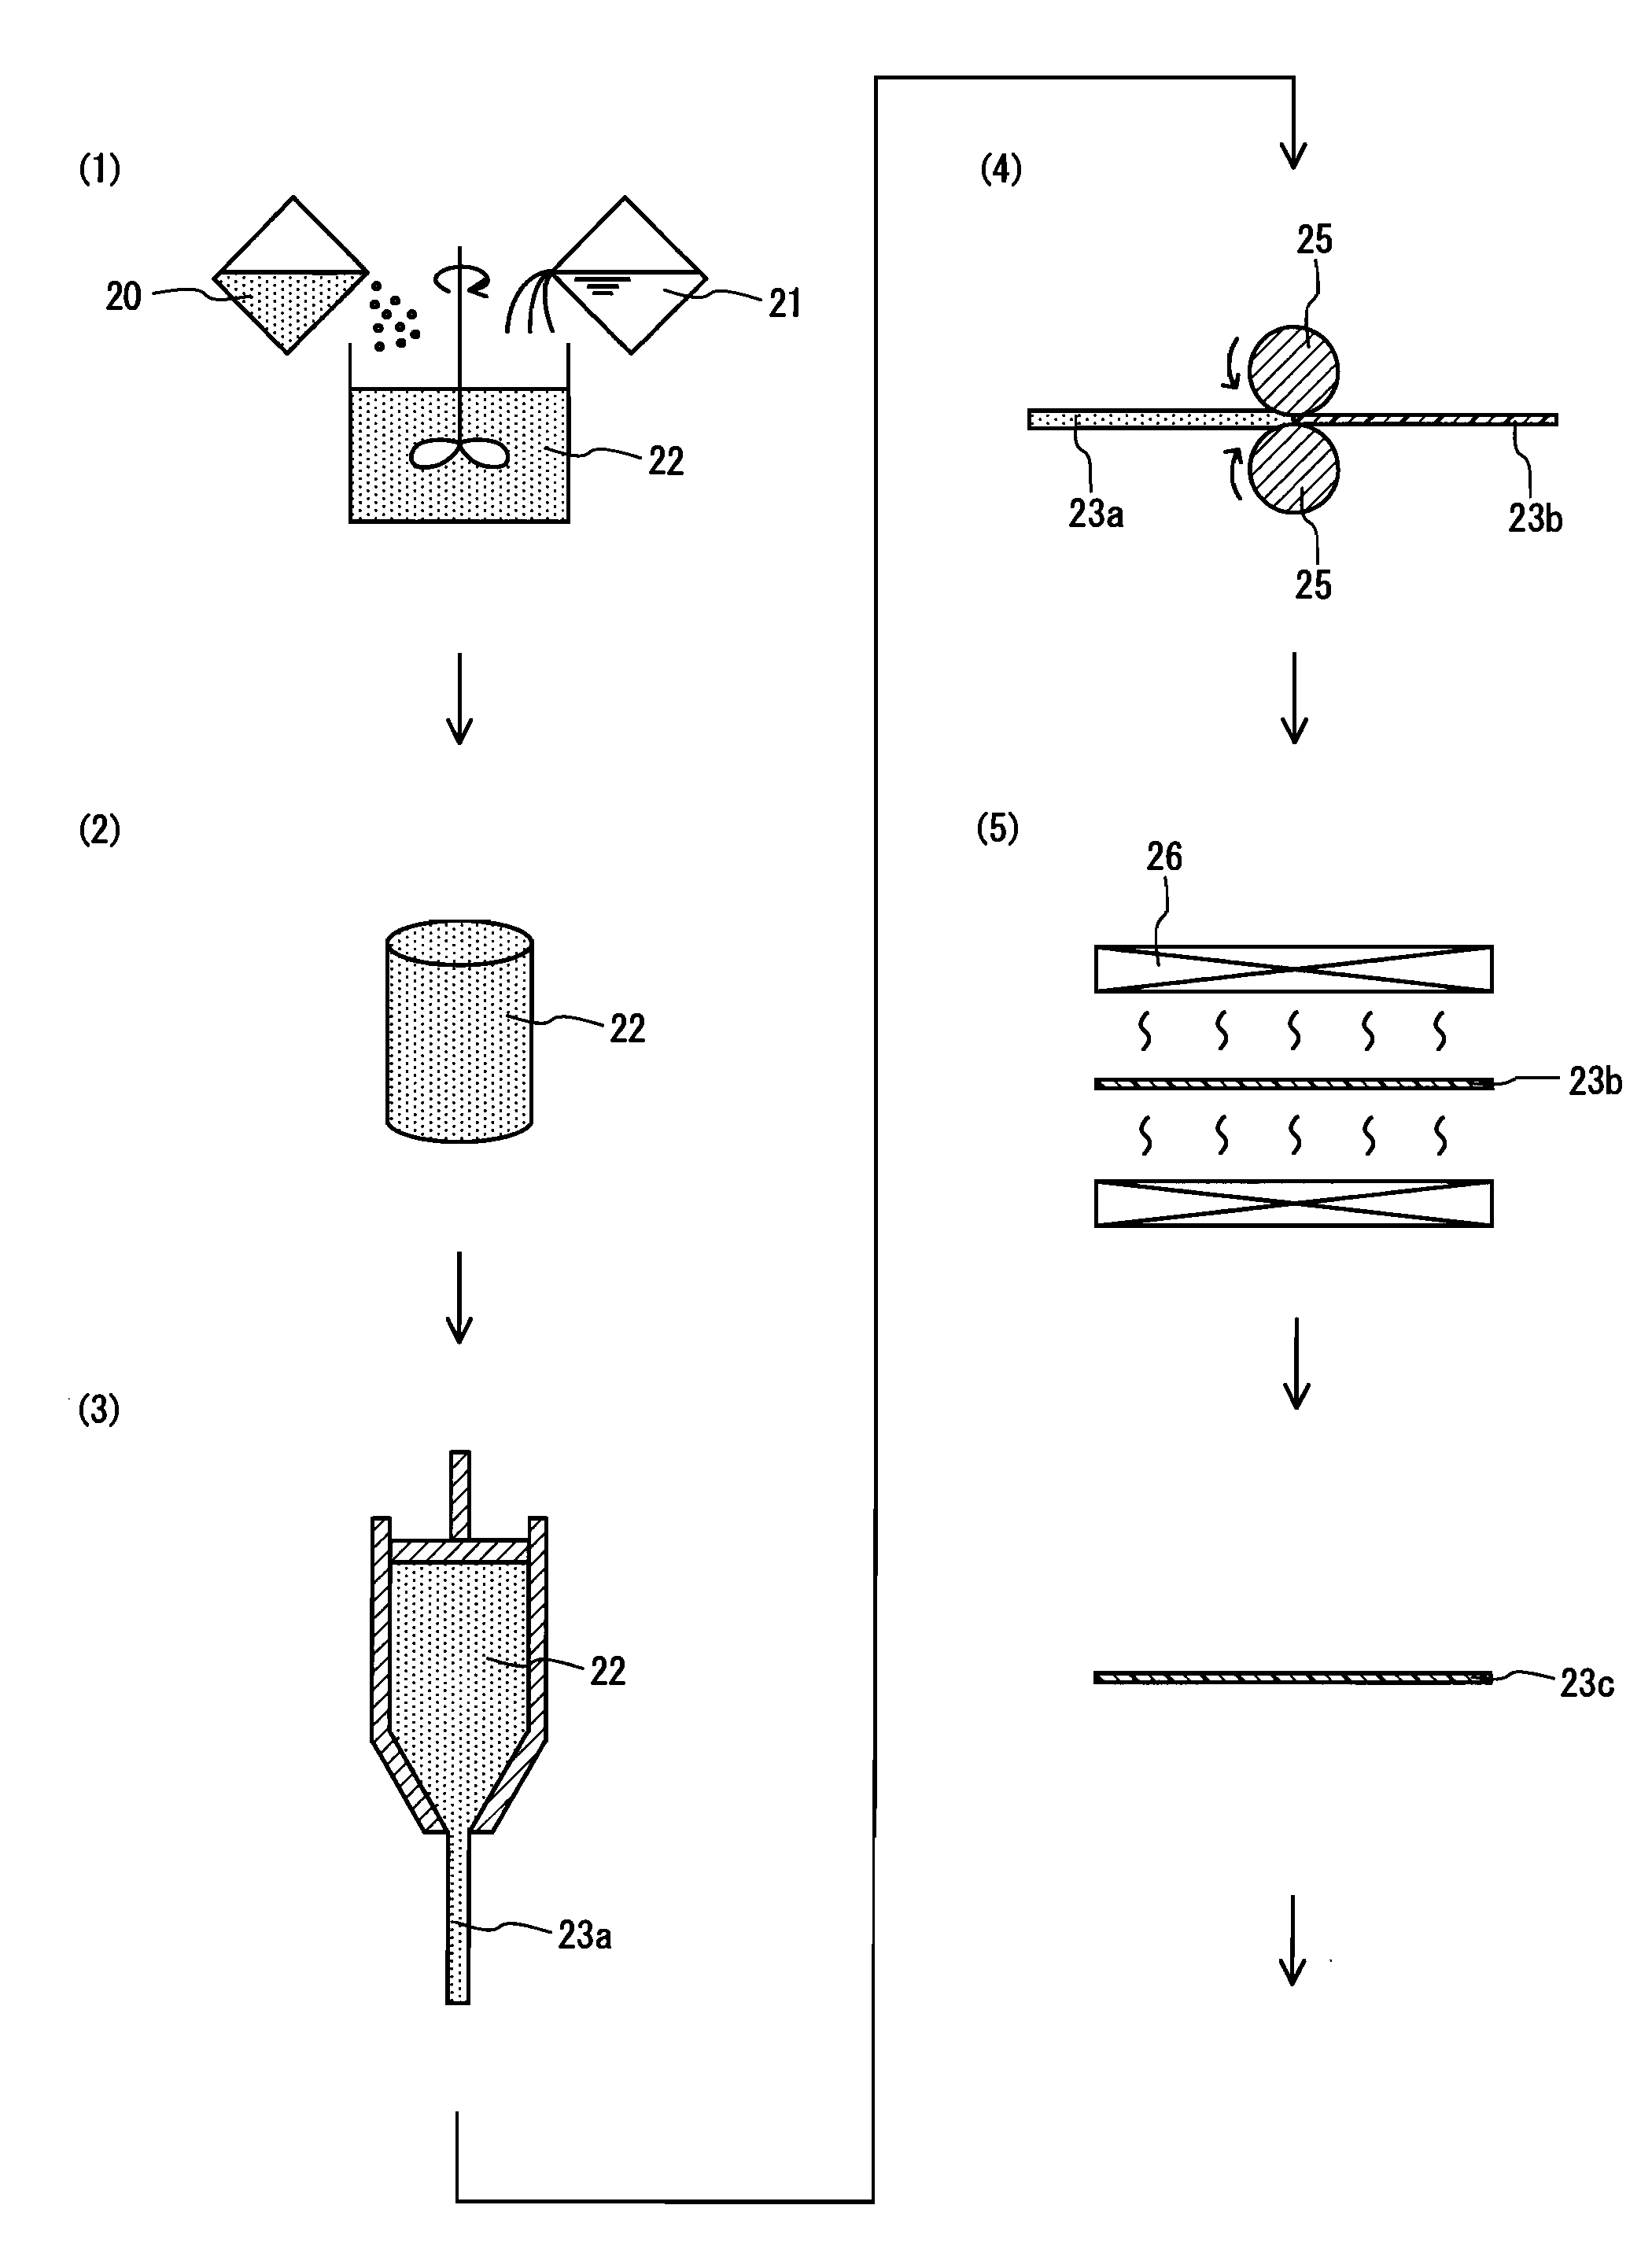 Water-proof sound-transmitting membrane, method for producing water-proof sound-transmitting membrane, and electrical appliance using the membrane